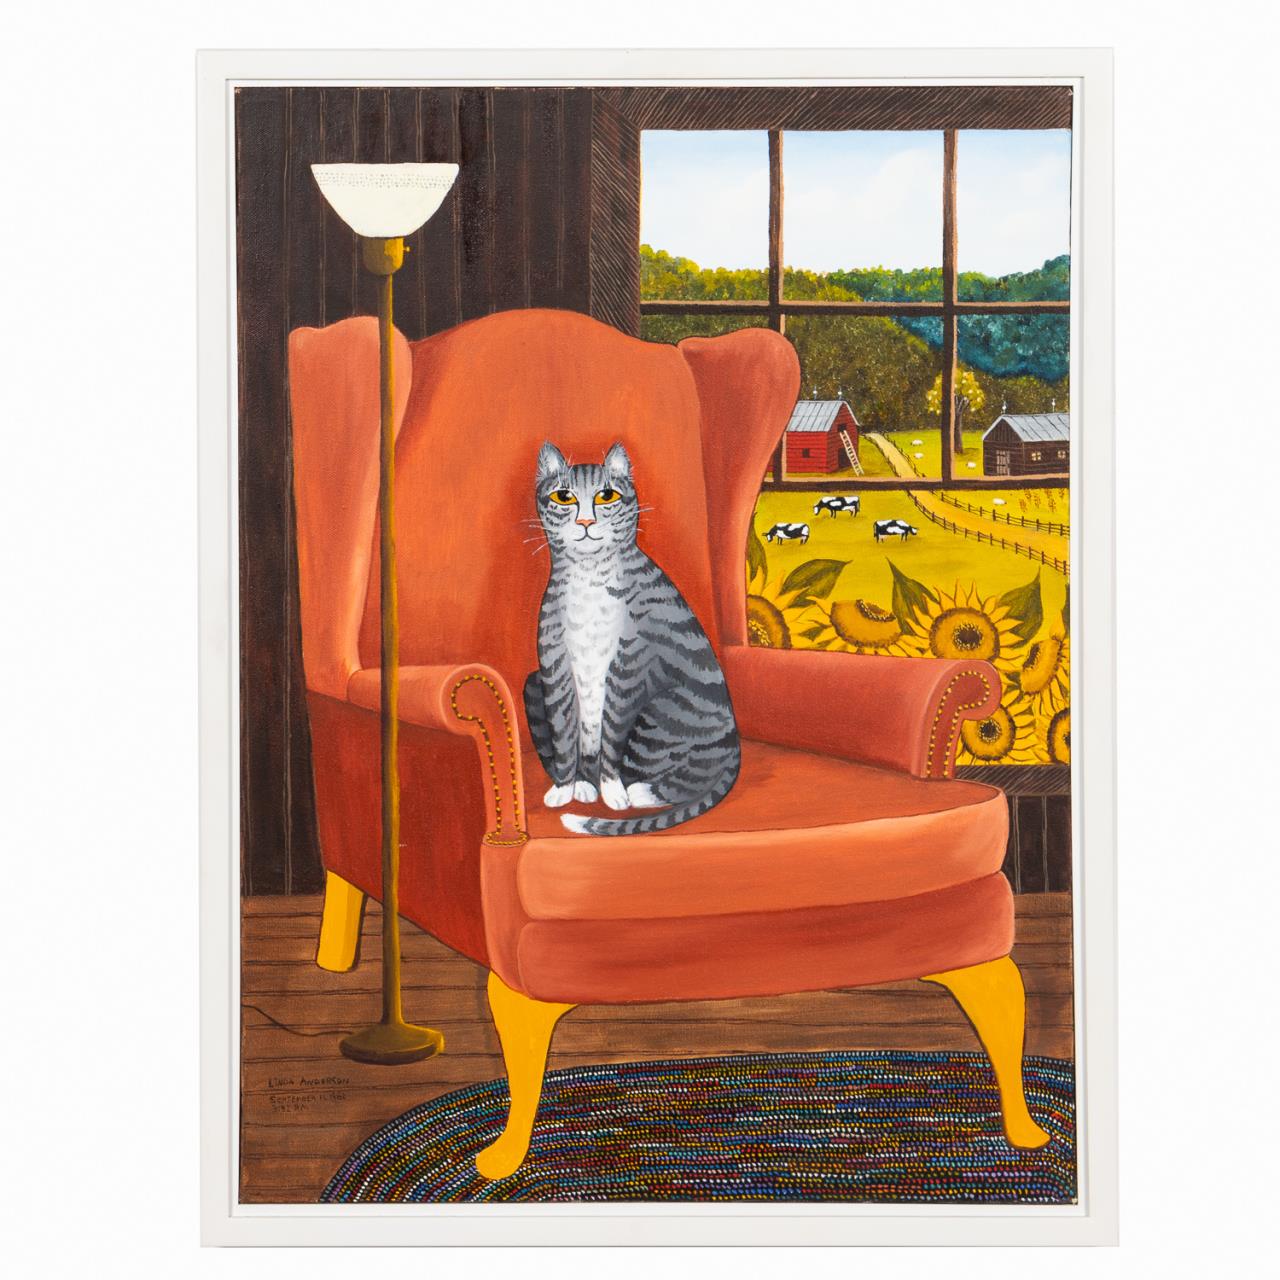 LINDA  ANDERSON, CAT ON CHAIR,